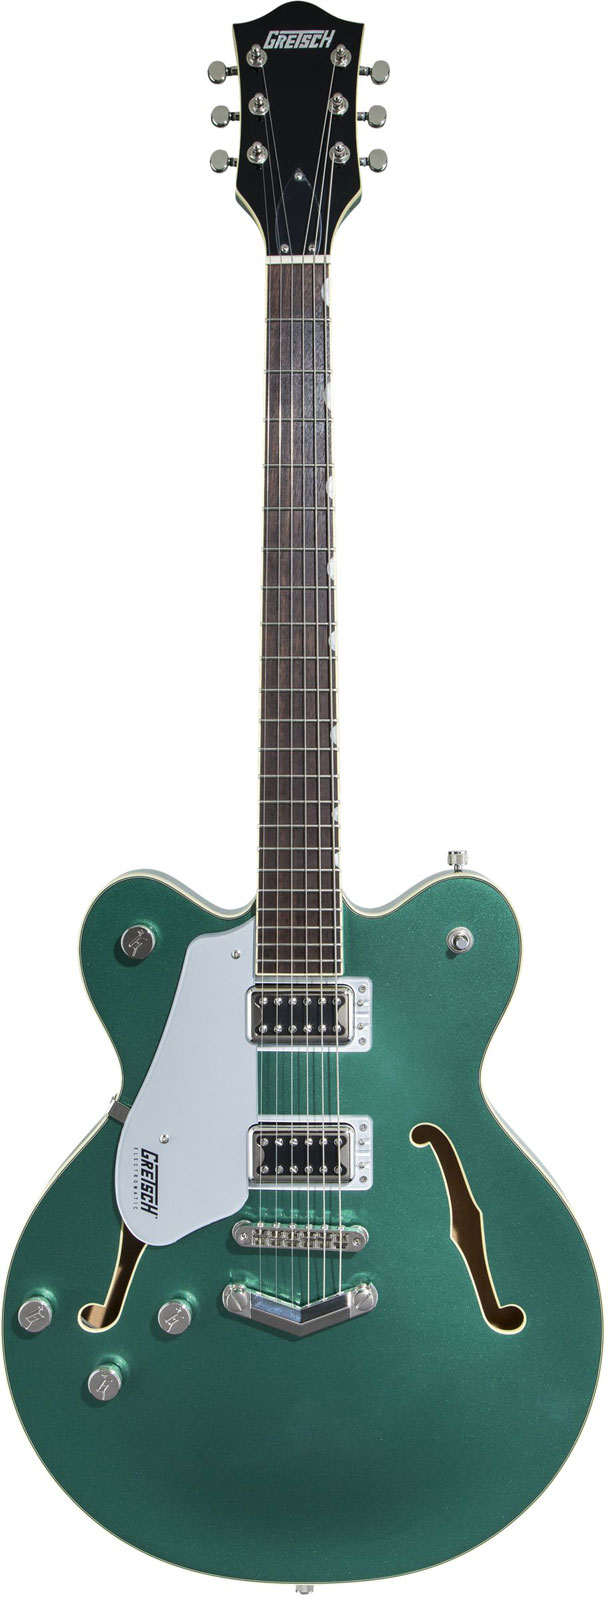 GRETSCH GUITARS G5622LH ELECTROMATIC CENTER BLOCK DOUBLE-CUT WITH V-STOPTAIL, LHED LRL, GEORGIA GREEN